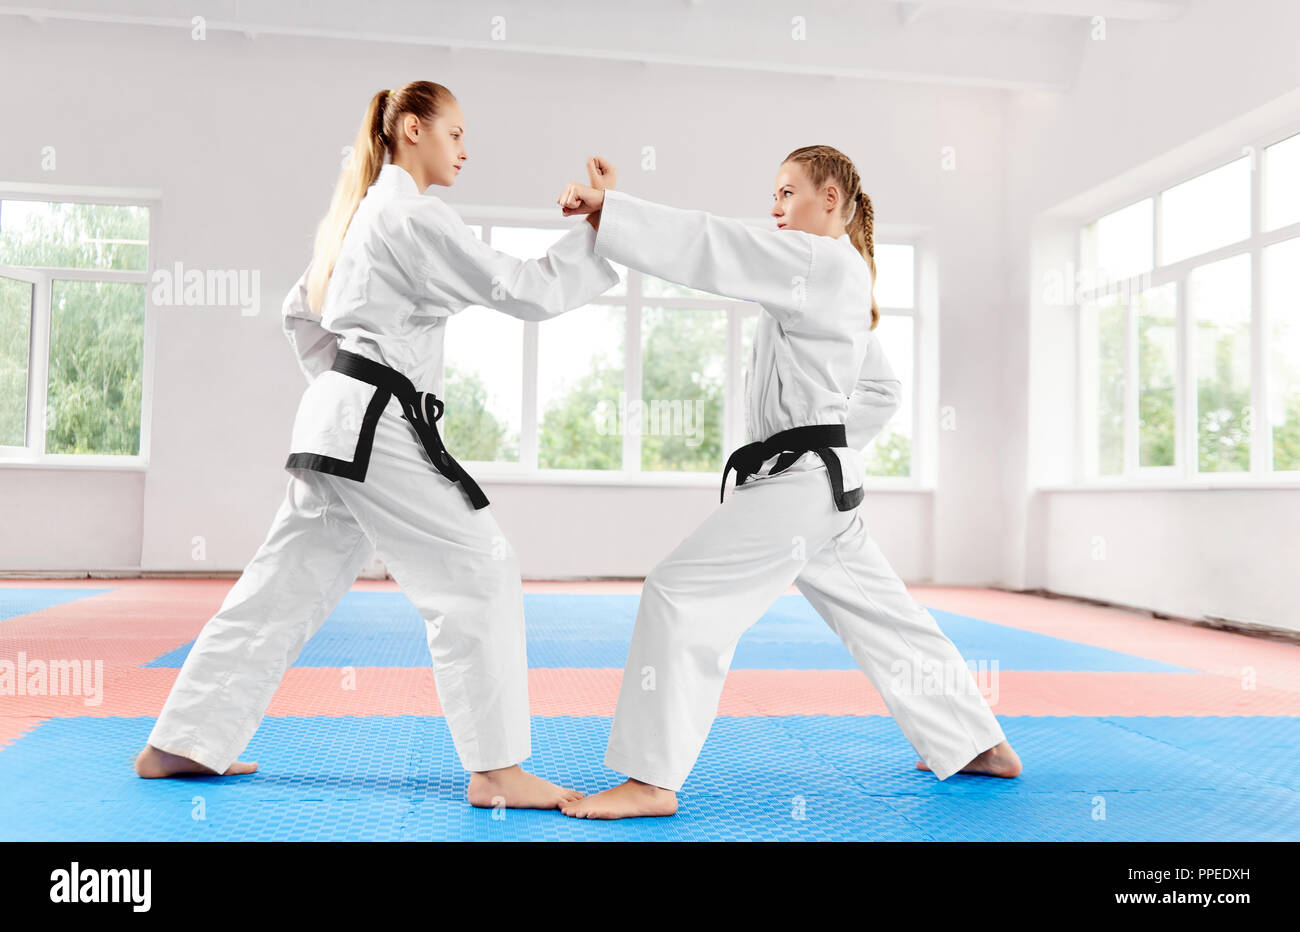 Two young athletic girls struggling using karate techniques in light karate class. Strong women wearing in white kimono and black belts doing competitions among themselves. Concept of sport. Stock Photo